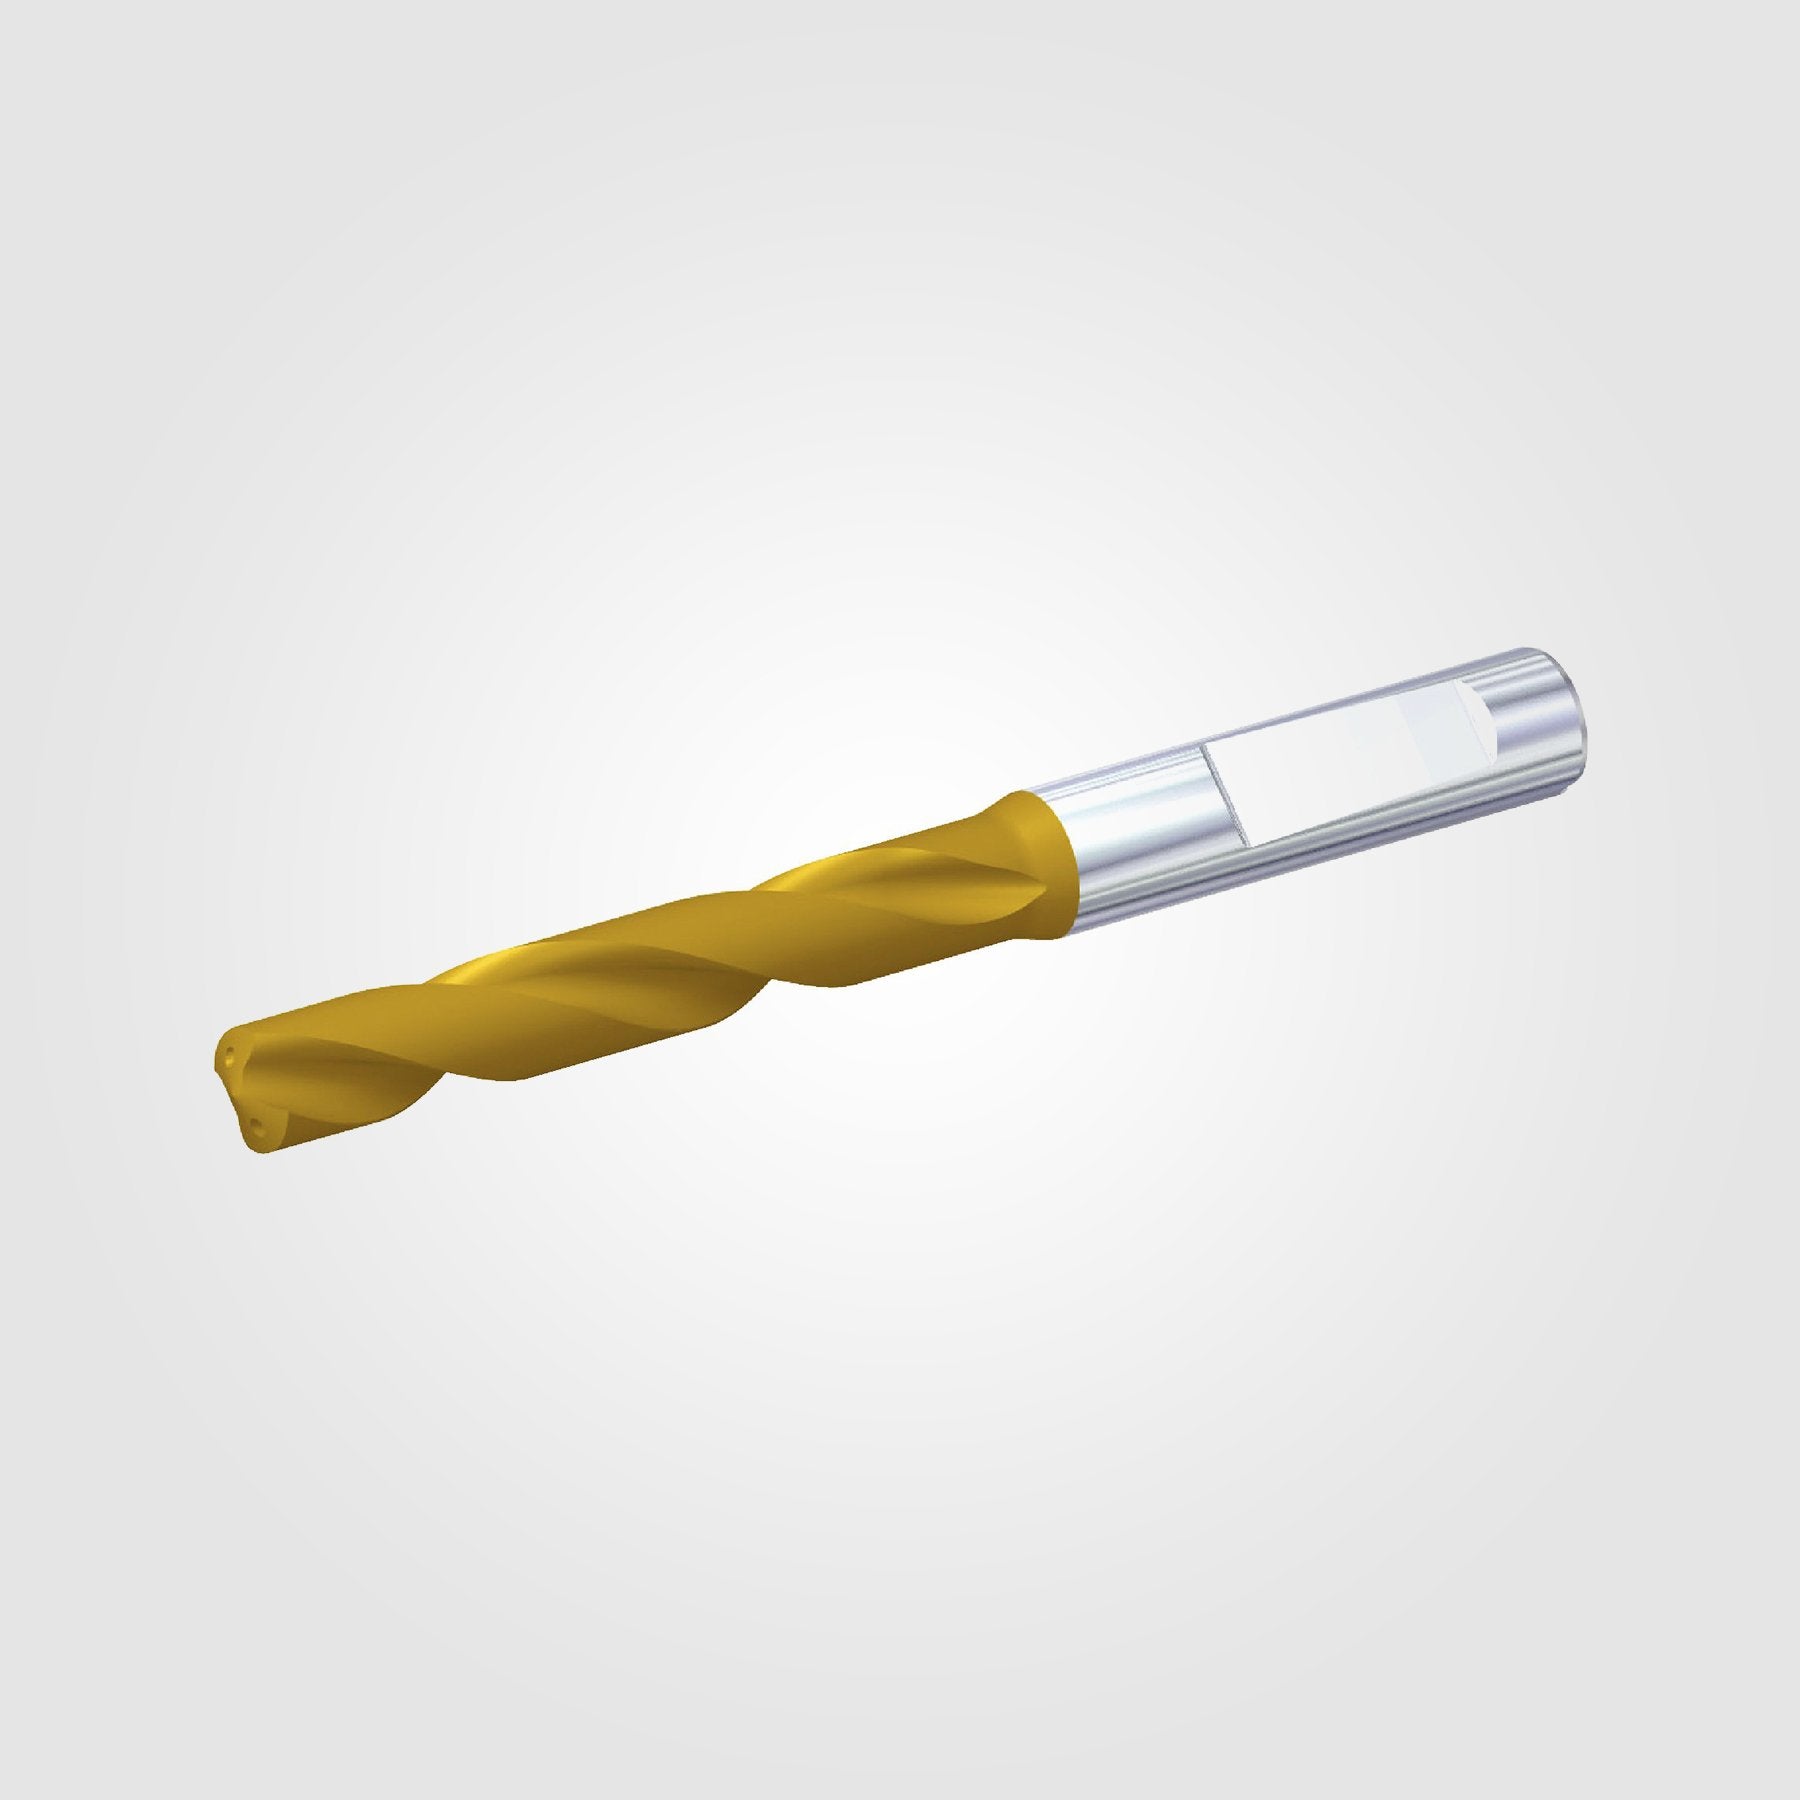 GOdrill (THROUGH COOLANT) | 6mm / .2362" / 3xD | SOLID CARBIDE DRILL | 4148939